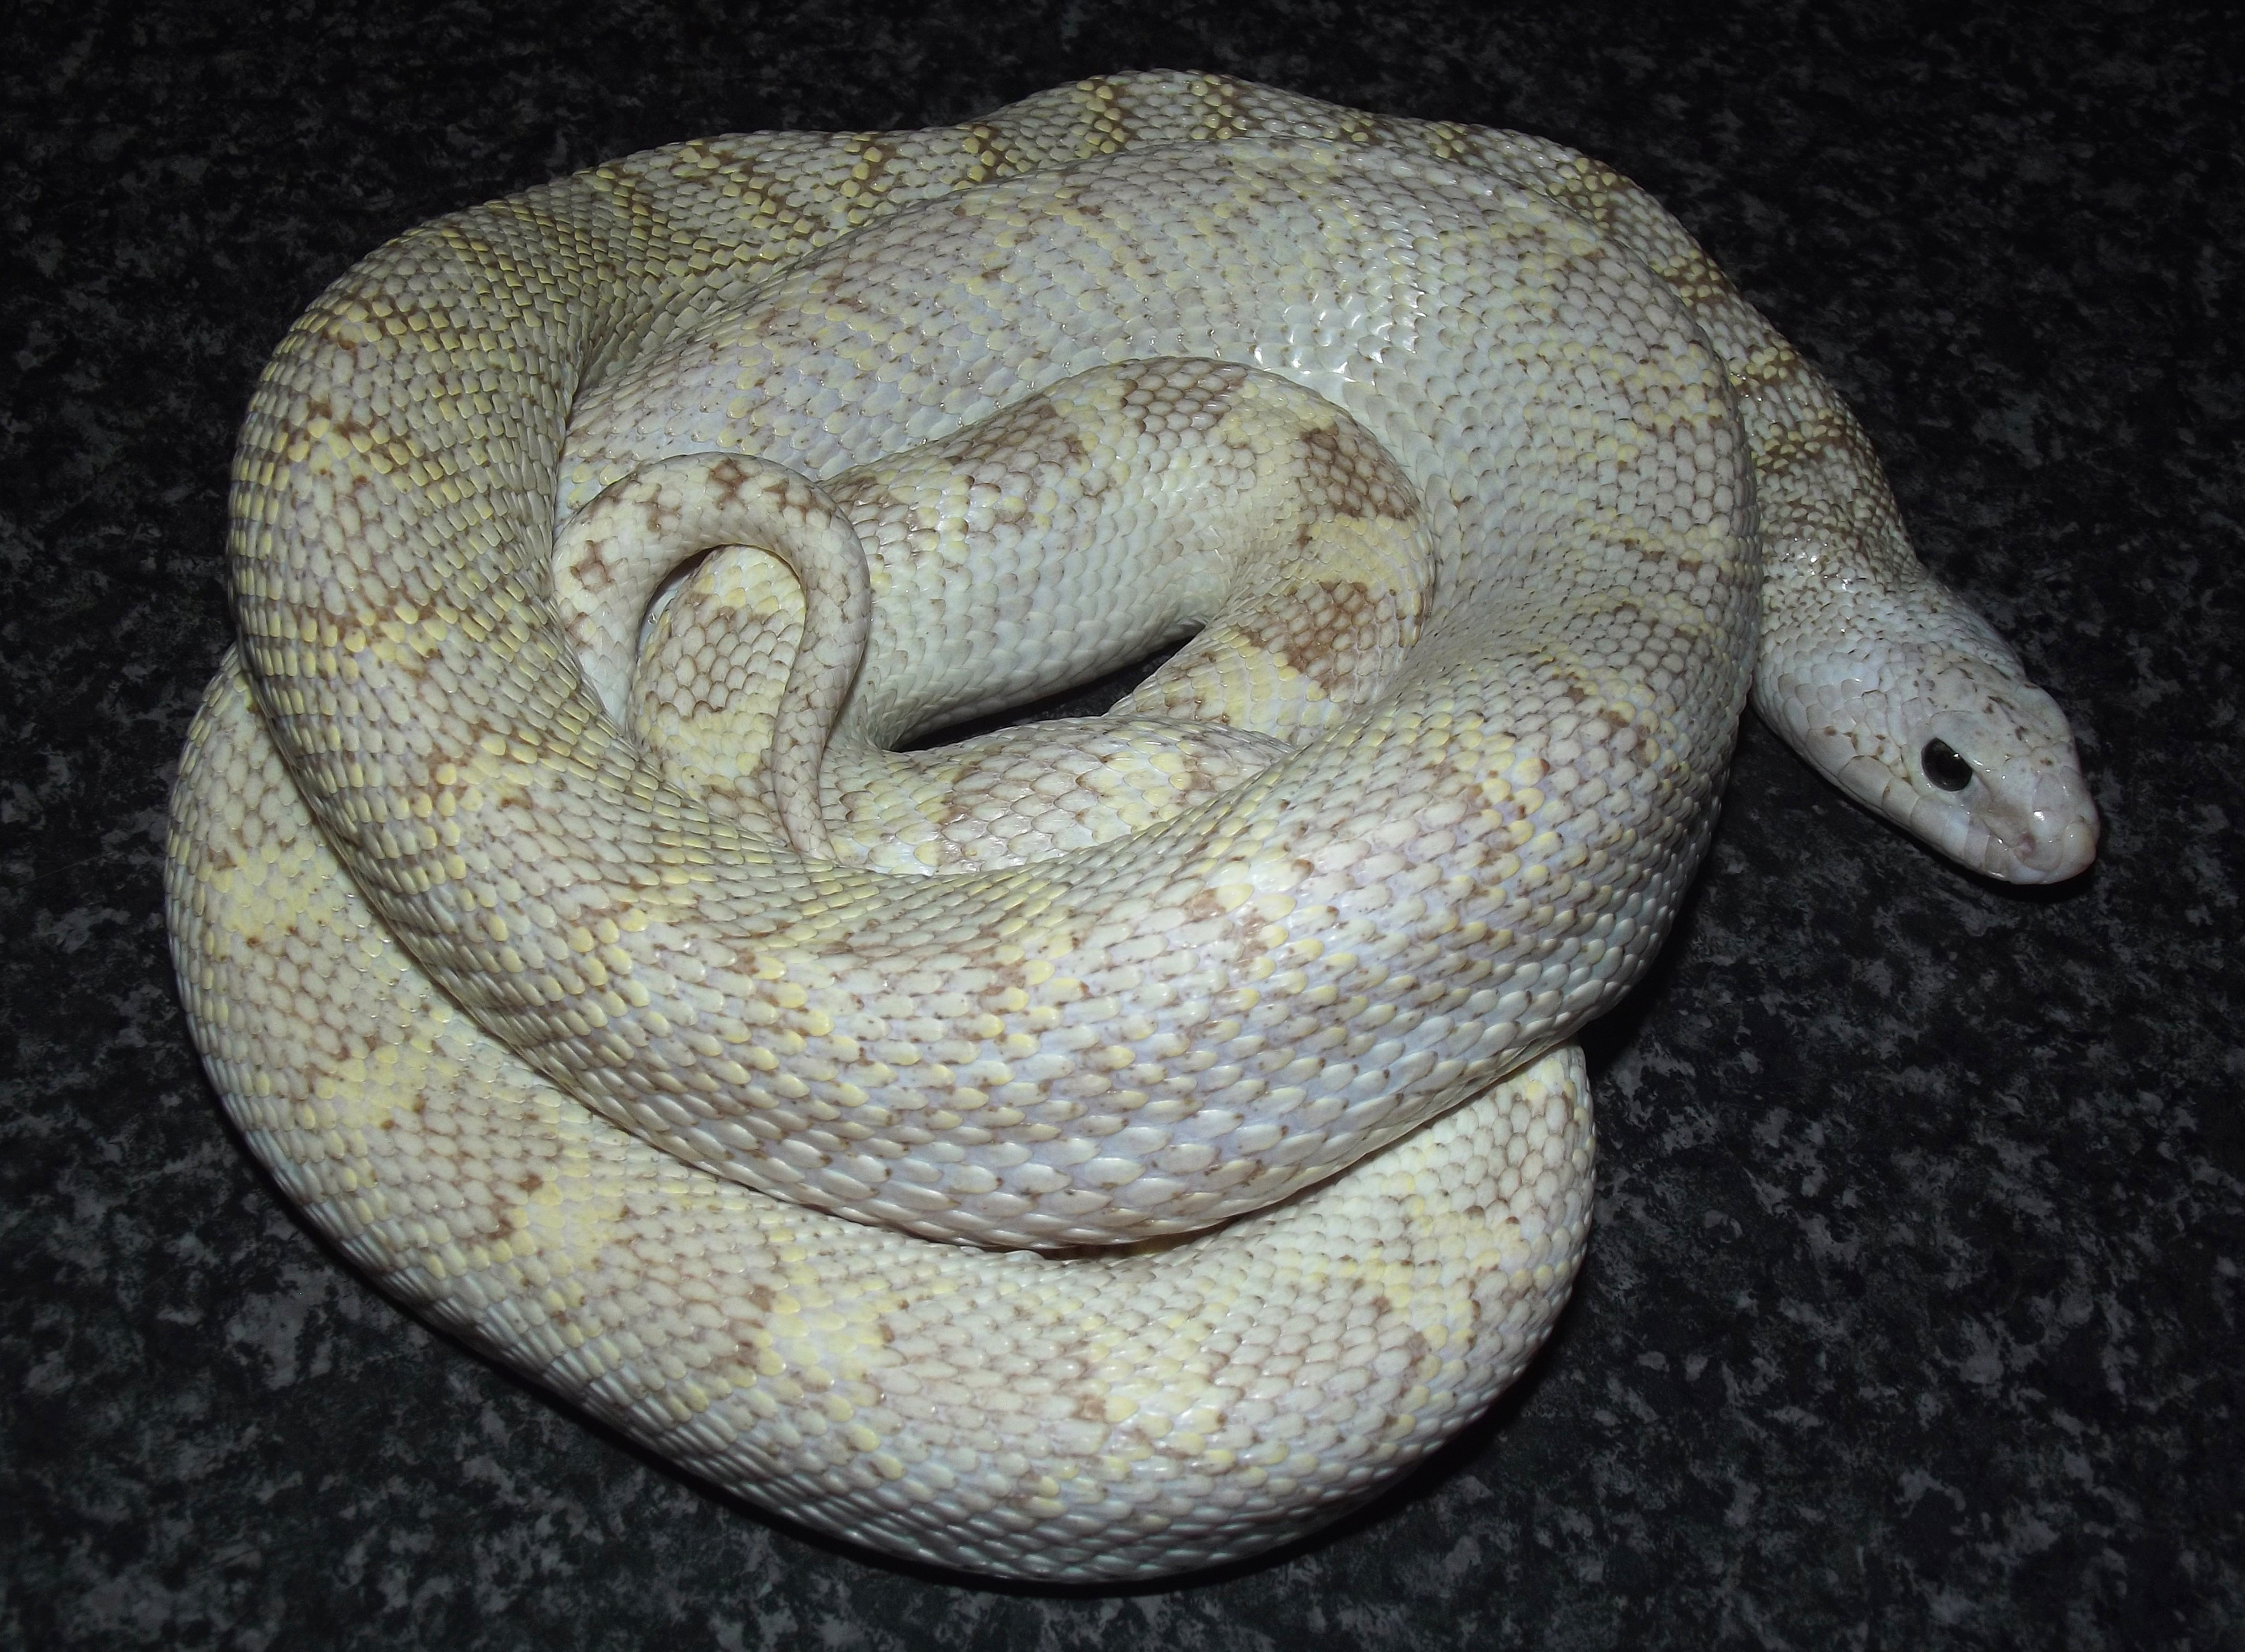 pituophis caternifer sayi hypo white sided 1